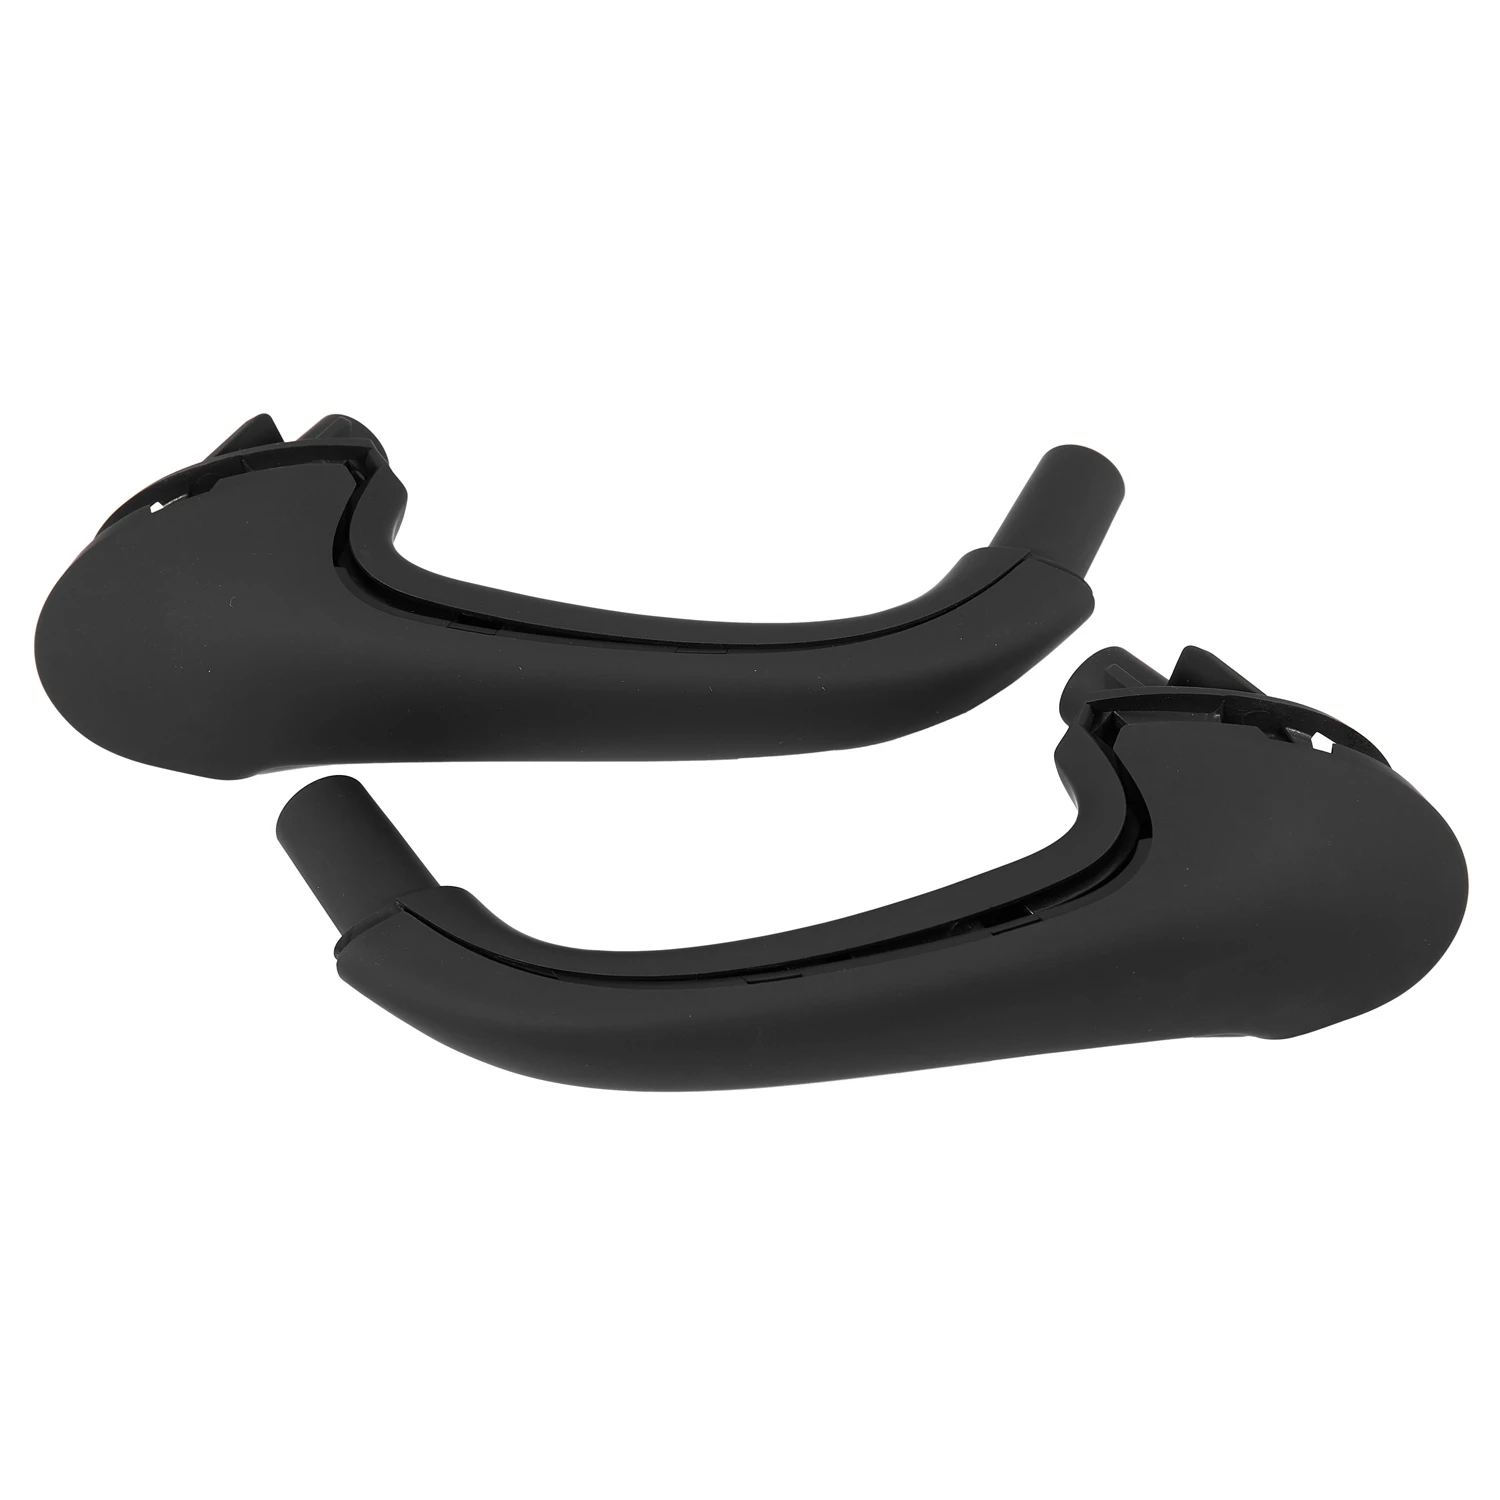 

2X Black Car Front Left / Right Interior Inner Door Pull Carrier Covers Handles Trim for Mercedes Benz W203 C-Class